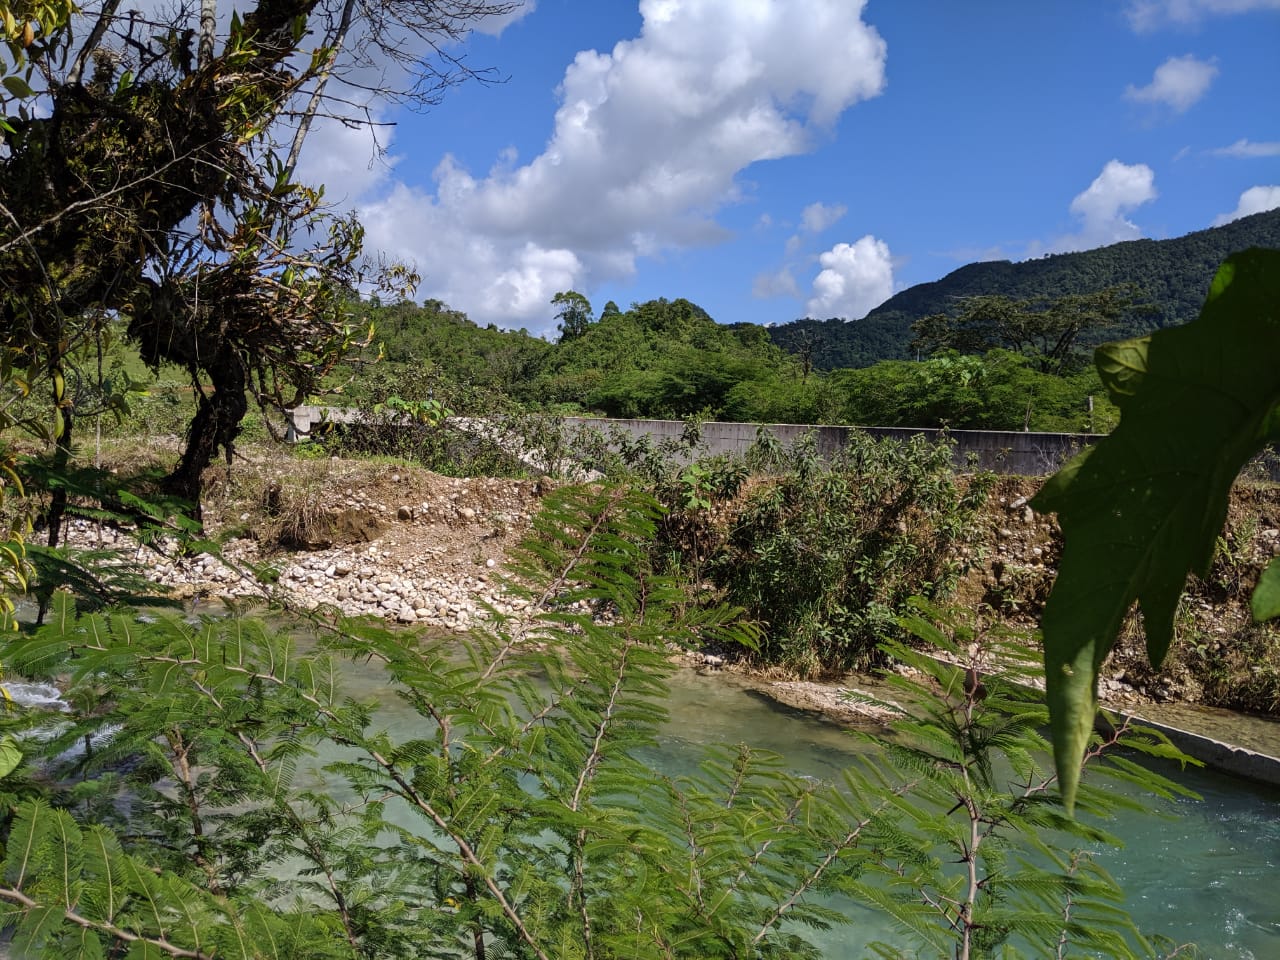 Dams already under construction in Ixquisis are visible from the river bank despite the communities' ongoing resistance against the imposition of mega-projects in their territories.